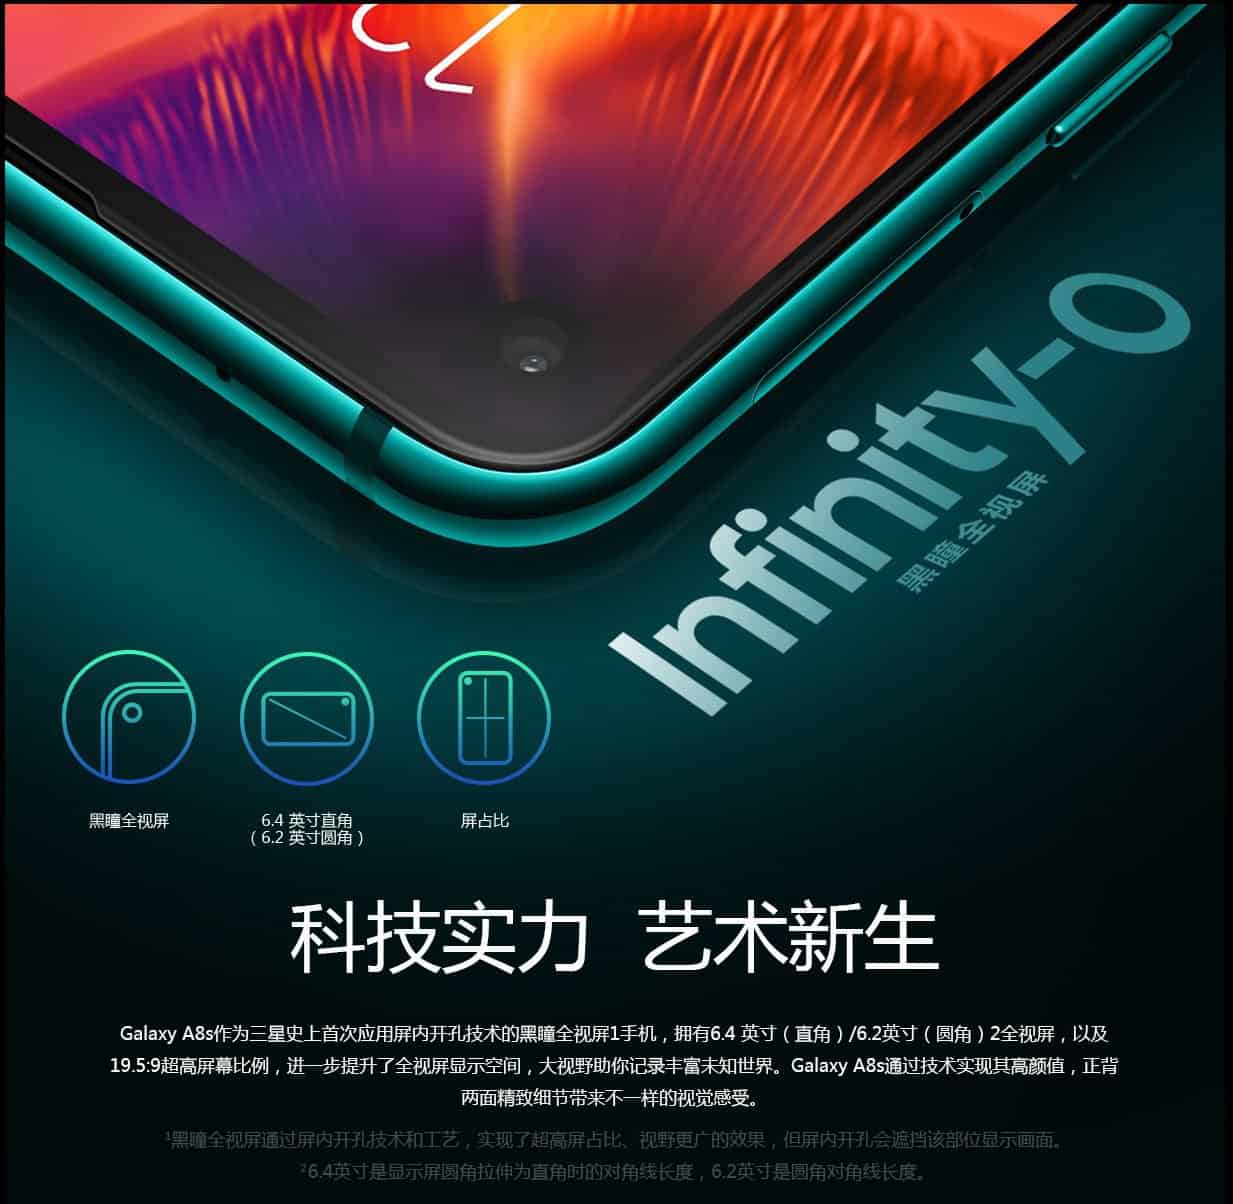 Samsung galaxy a8s noted with infinity-o display, snapdragon 710 cpu, triple rear cameras but no audio jack